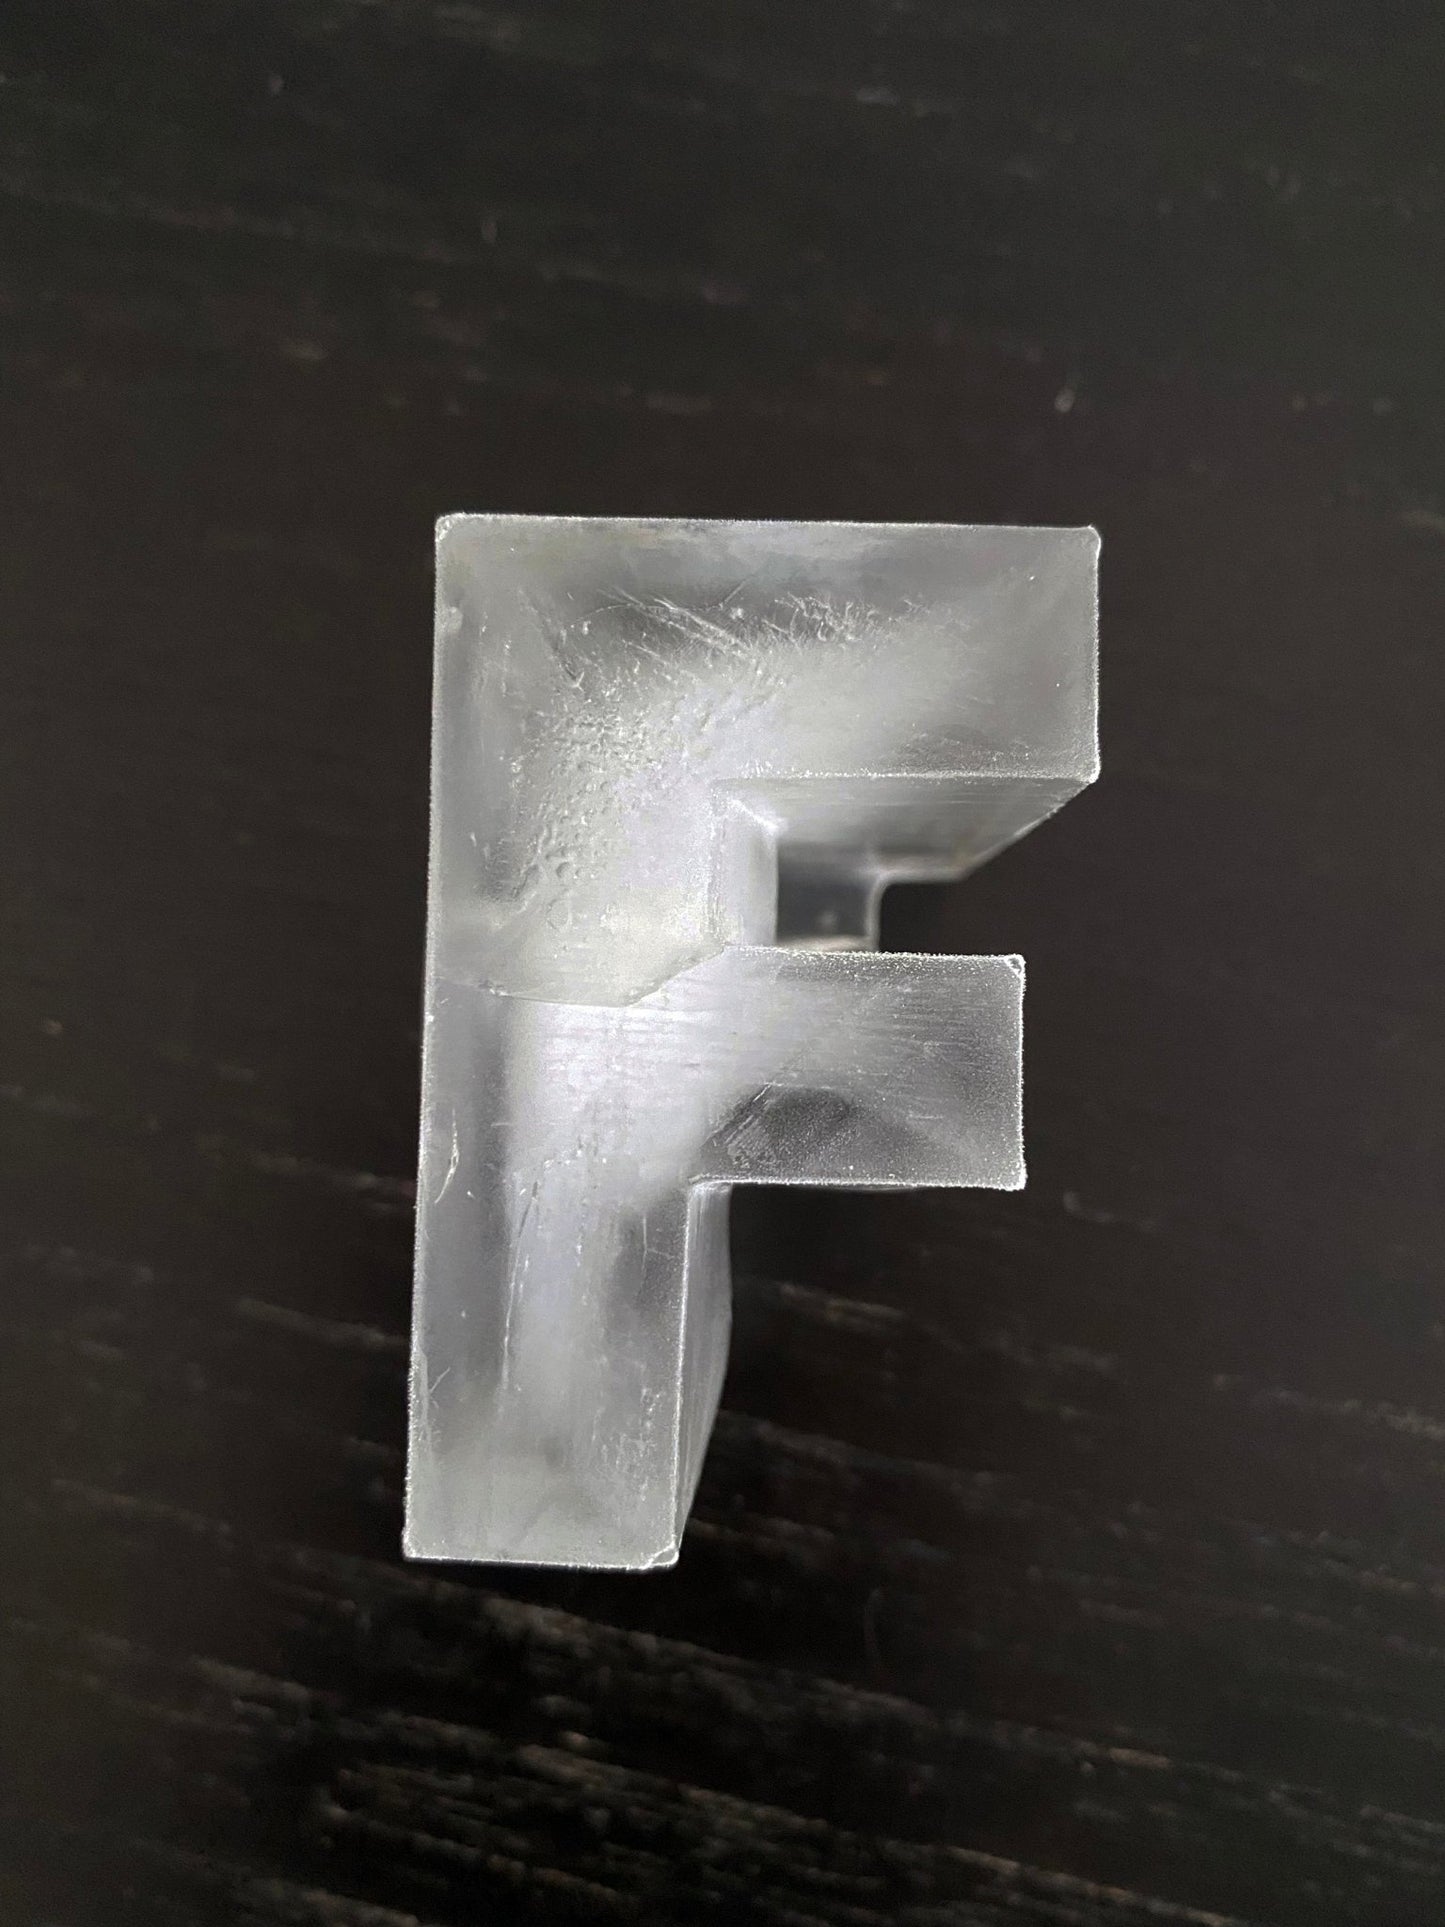 Custom Letter Shaped Ice Mold - Fits 3-inch cocktail glass